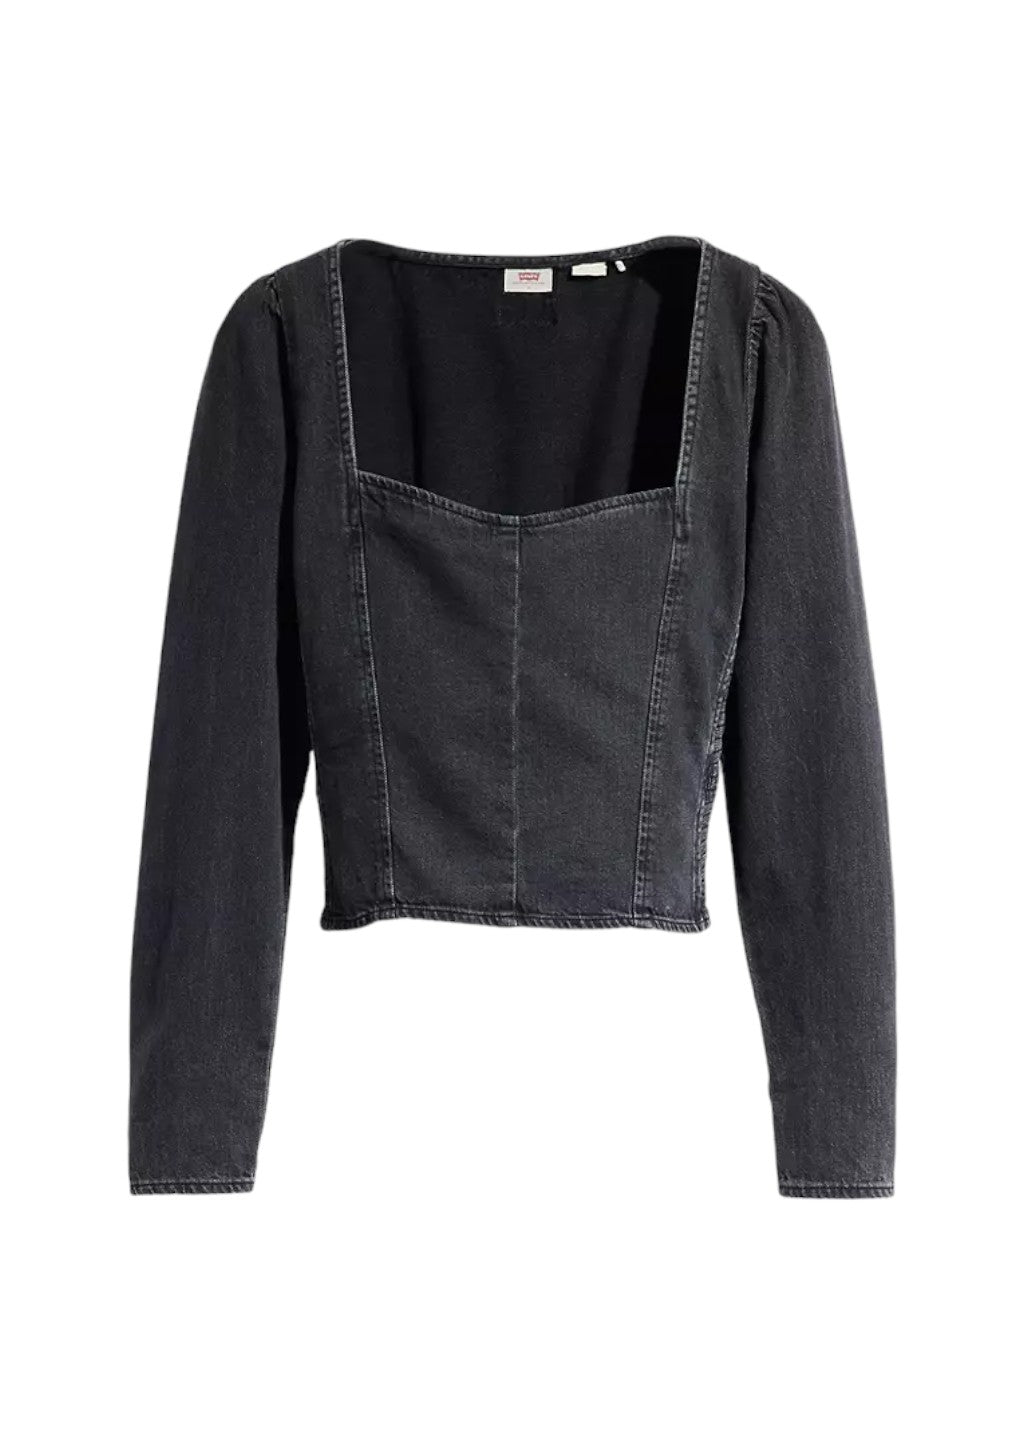 Levi's - Ophelia Corset Blouse - Letter From The Editor